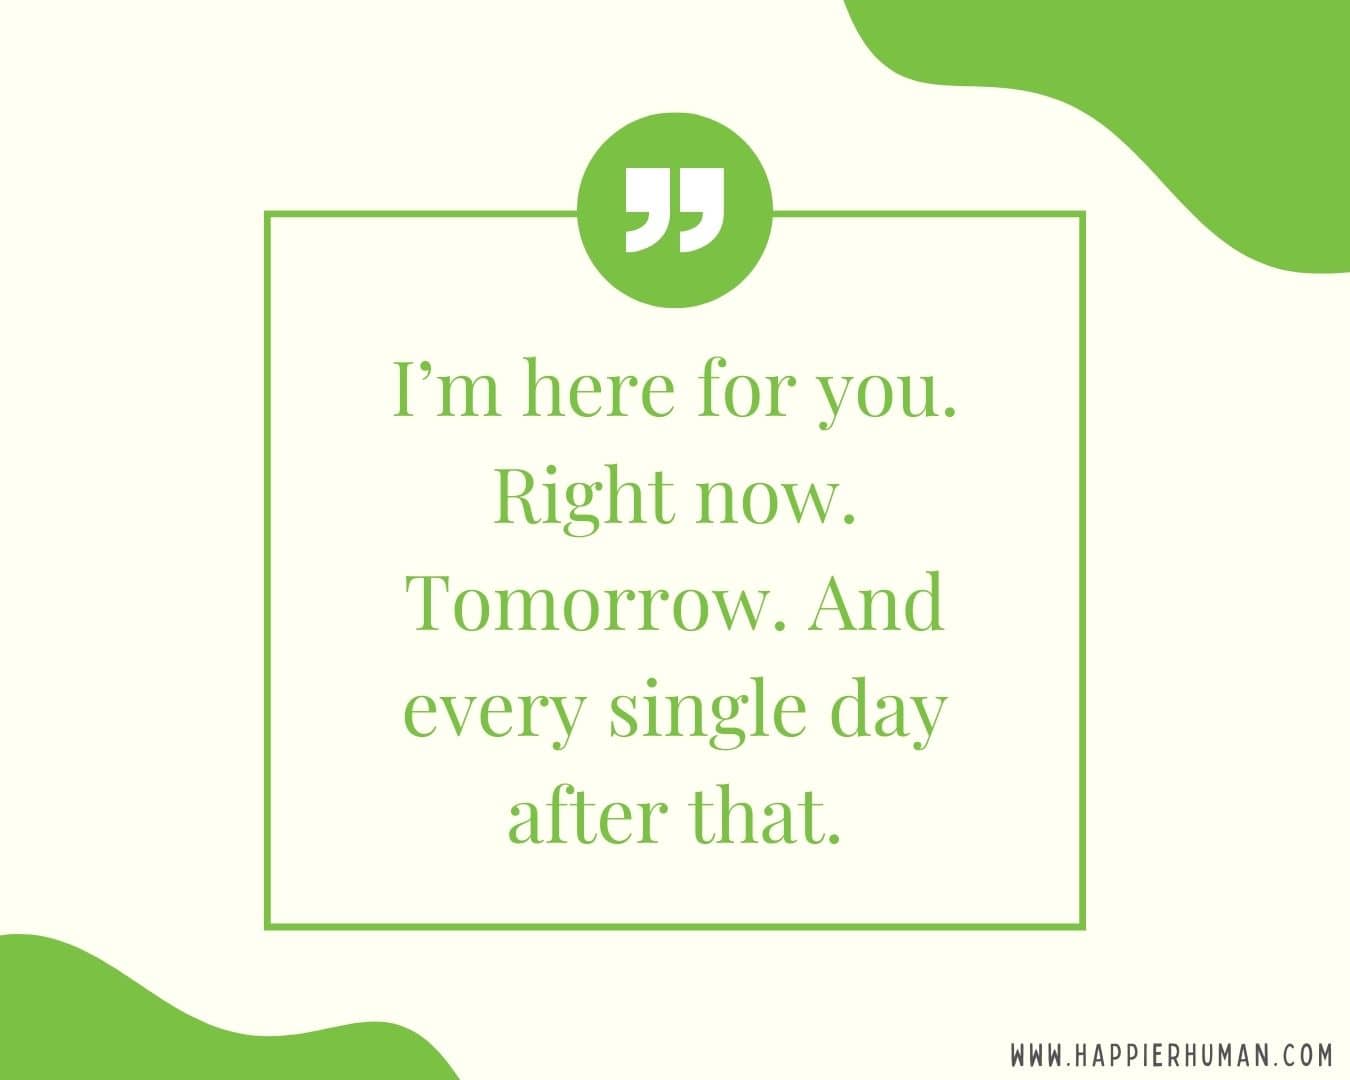 I’m Here for You Quotes - “I’m here for you. Right now. Tomorrow. And every single day after that.”